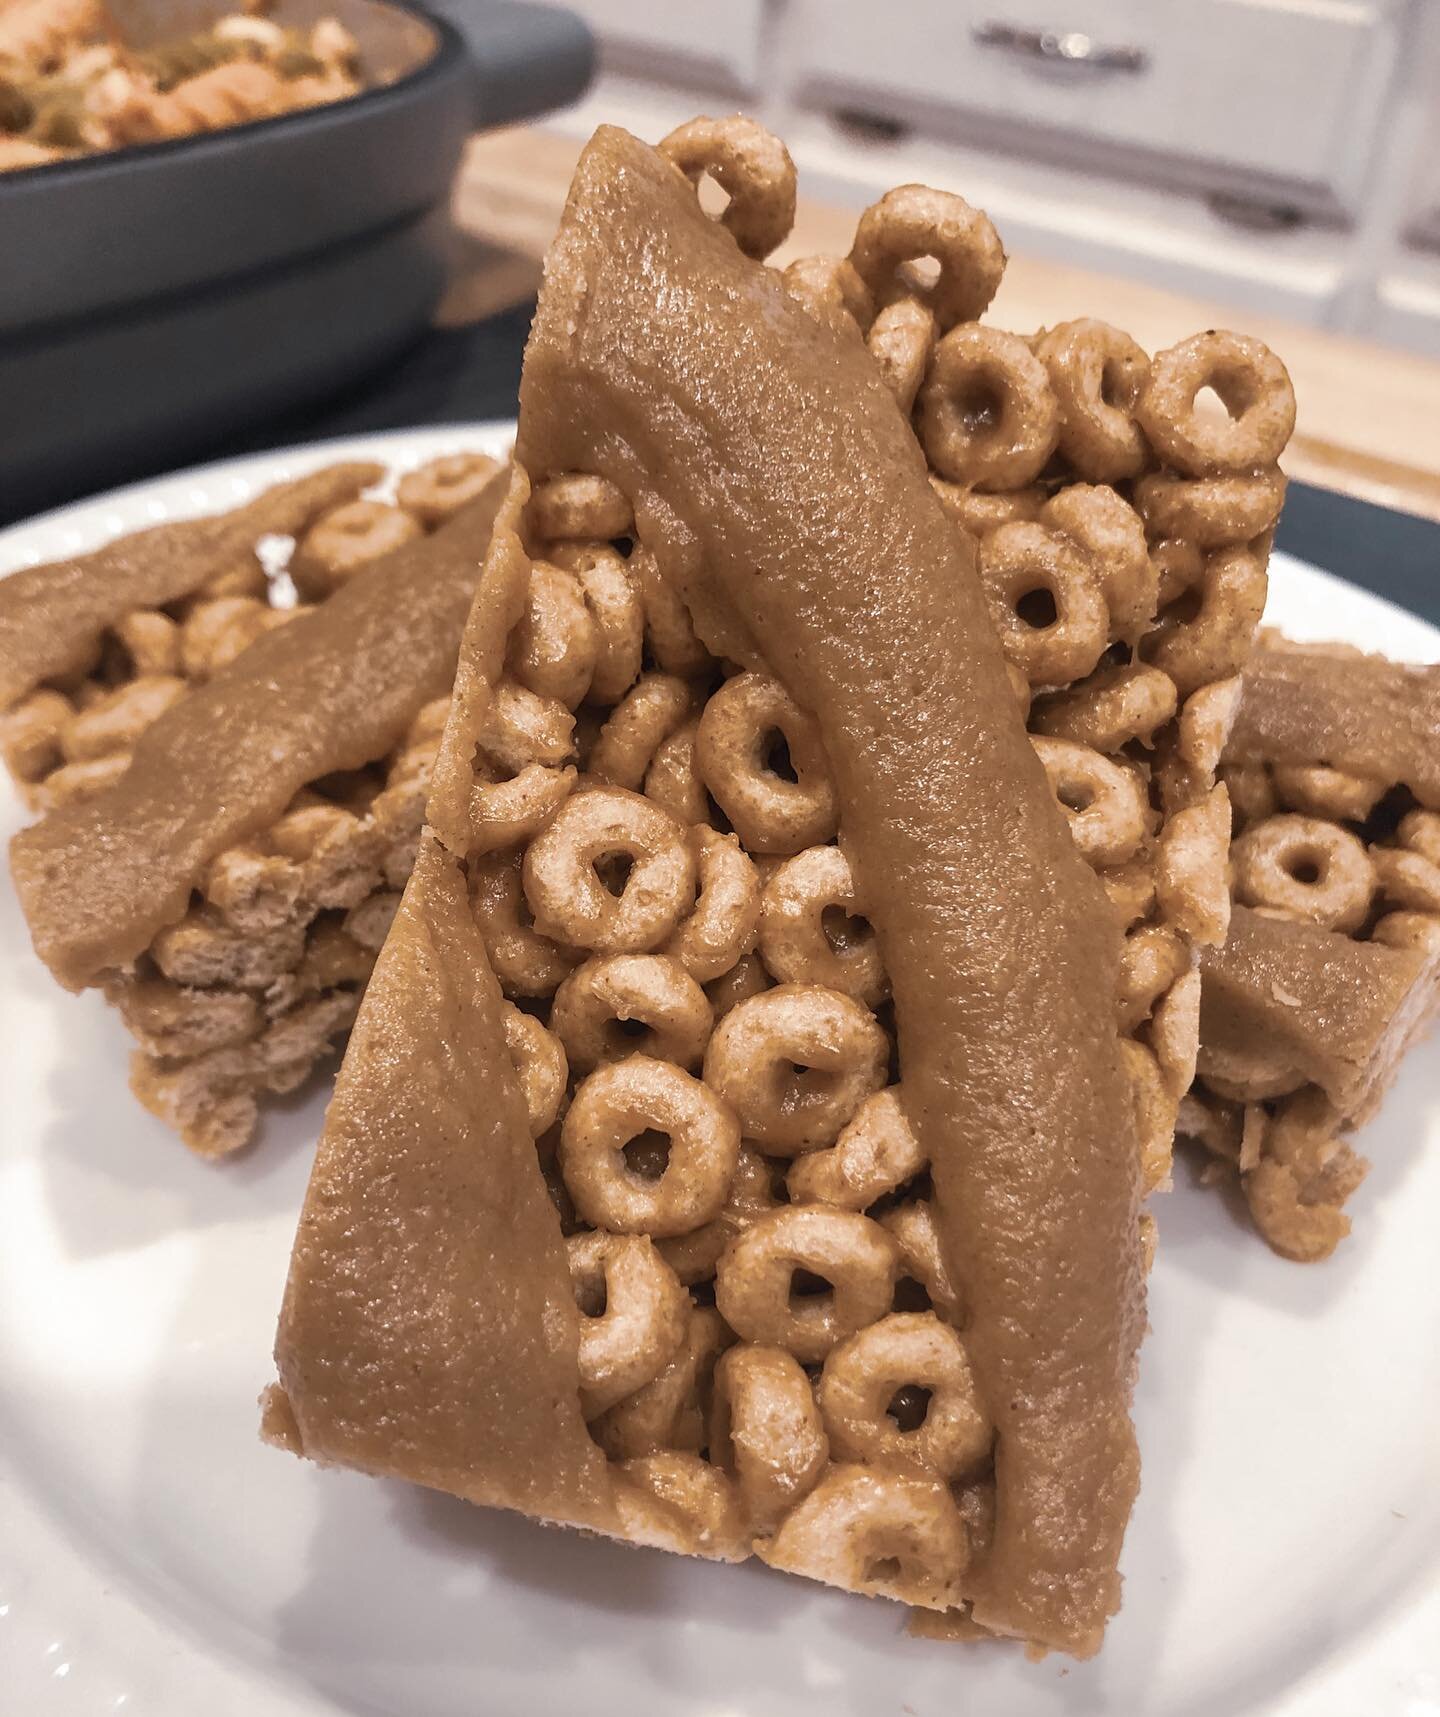 I decided to revisit my roots and experiment with one of my favorite mixtures, but tried it on something tasteless- Plain Cheerios. 

Guess what though, it works! 🤩

These no-bake dairy free cereal bars have become our family&rsquo;s new favorite sn